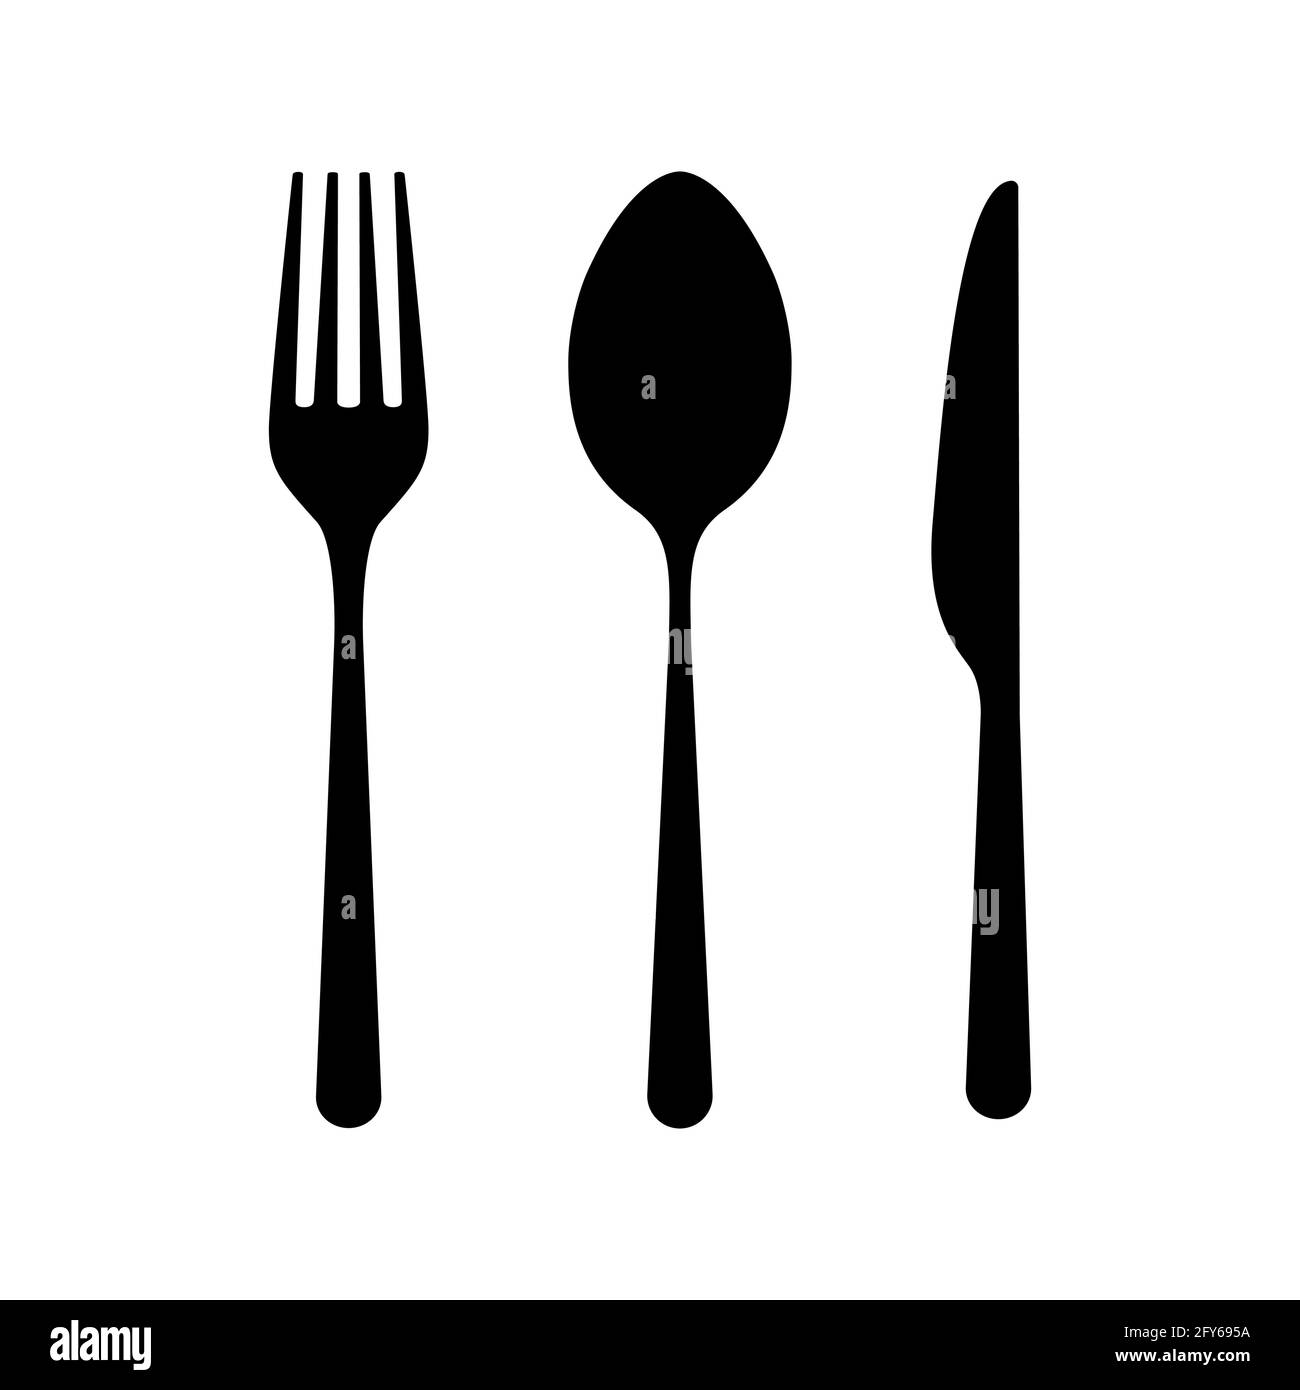 Restaurant silverware on a white background Vector Image